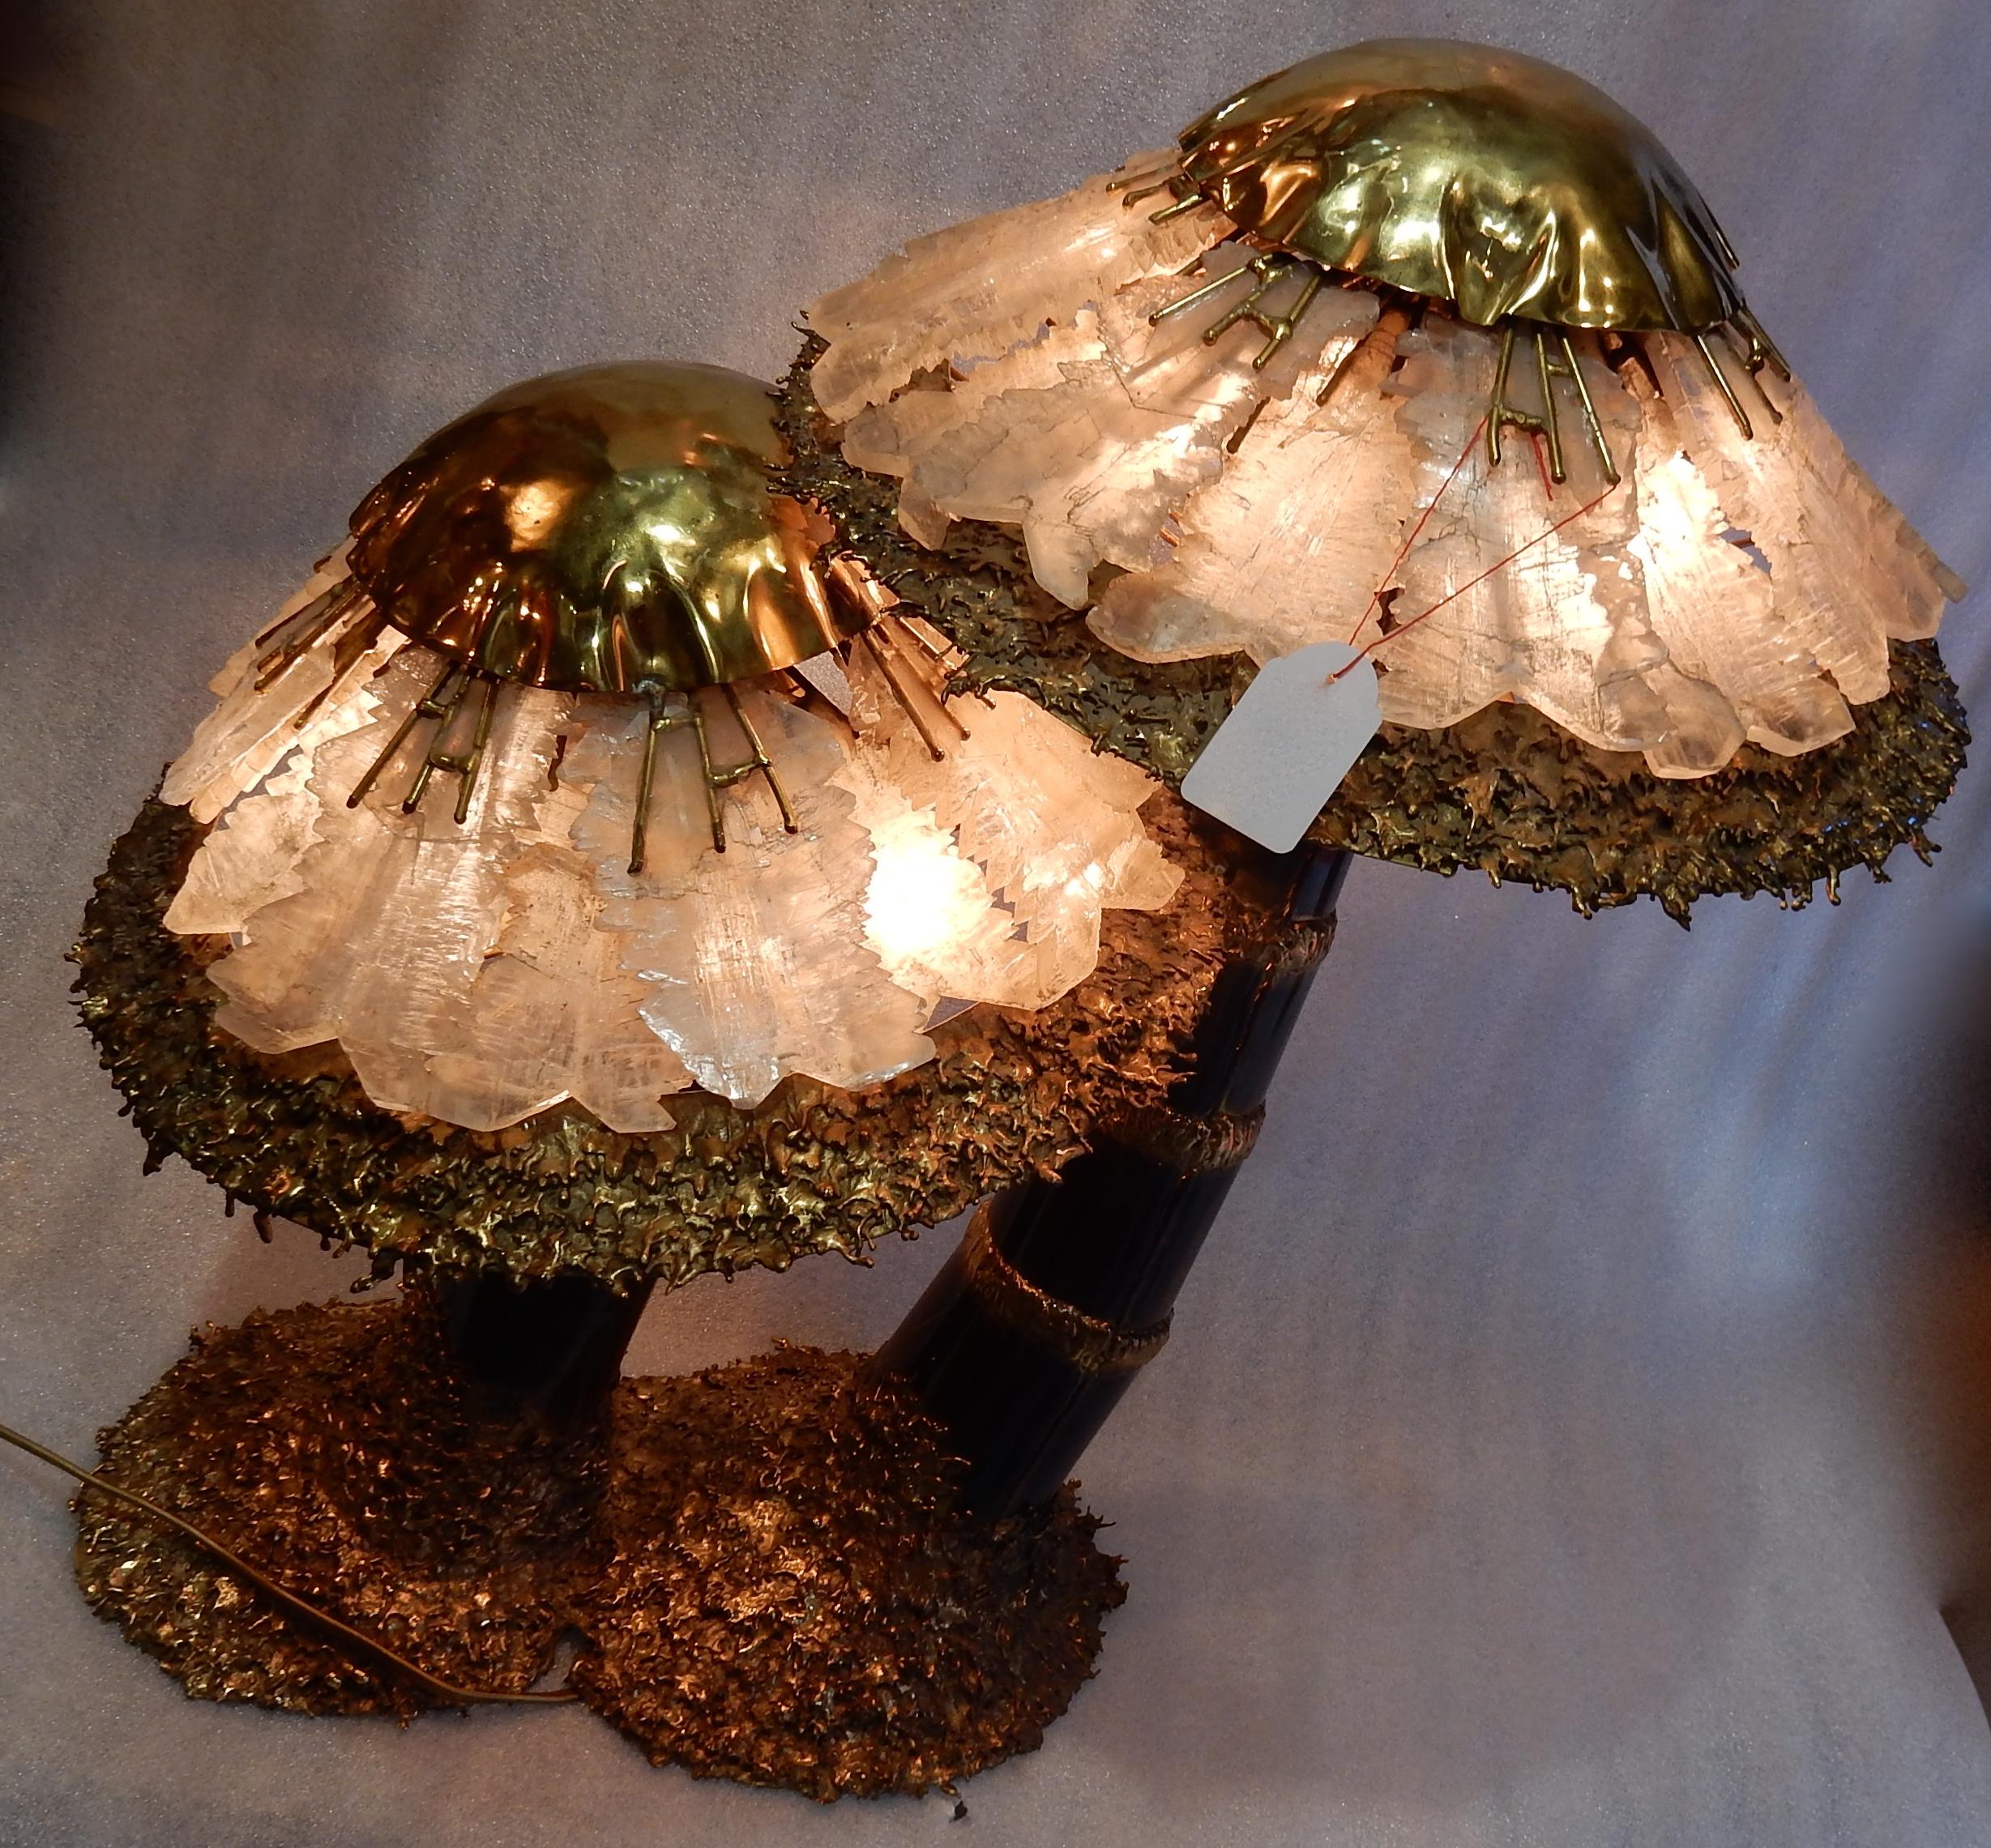 Lamp with 2 mushrooms in double patina brass and gypsum In the style of Isabelle Faure, Fernandez , Duval Brasseur
Length: 60 cm
Height: 64 cm
Width: 37 cm
Hats diameter: 37 cm
Base: 43 X 22 cm
Weight: 14 Kg.